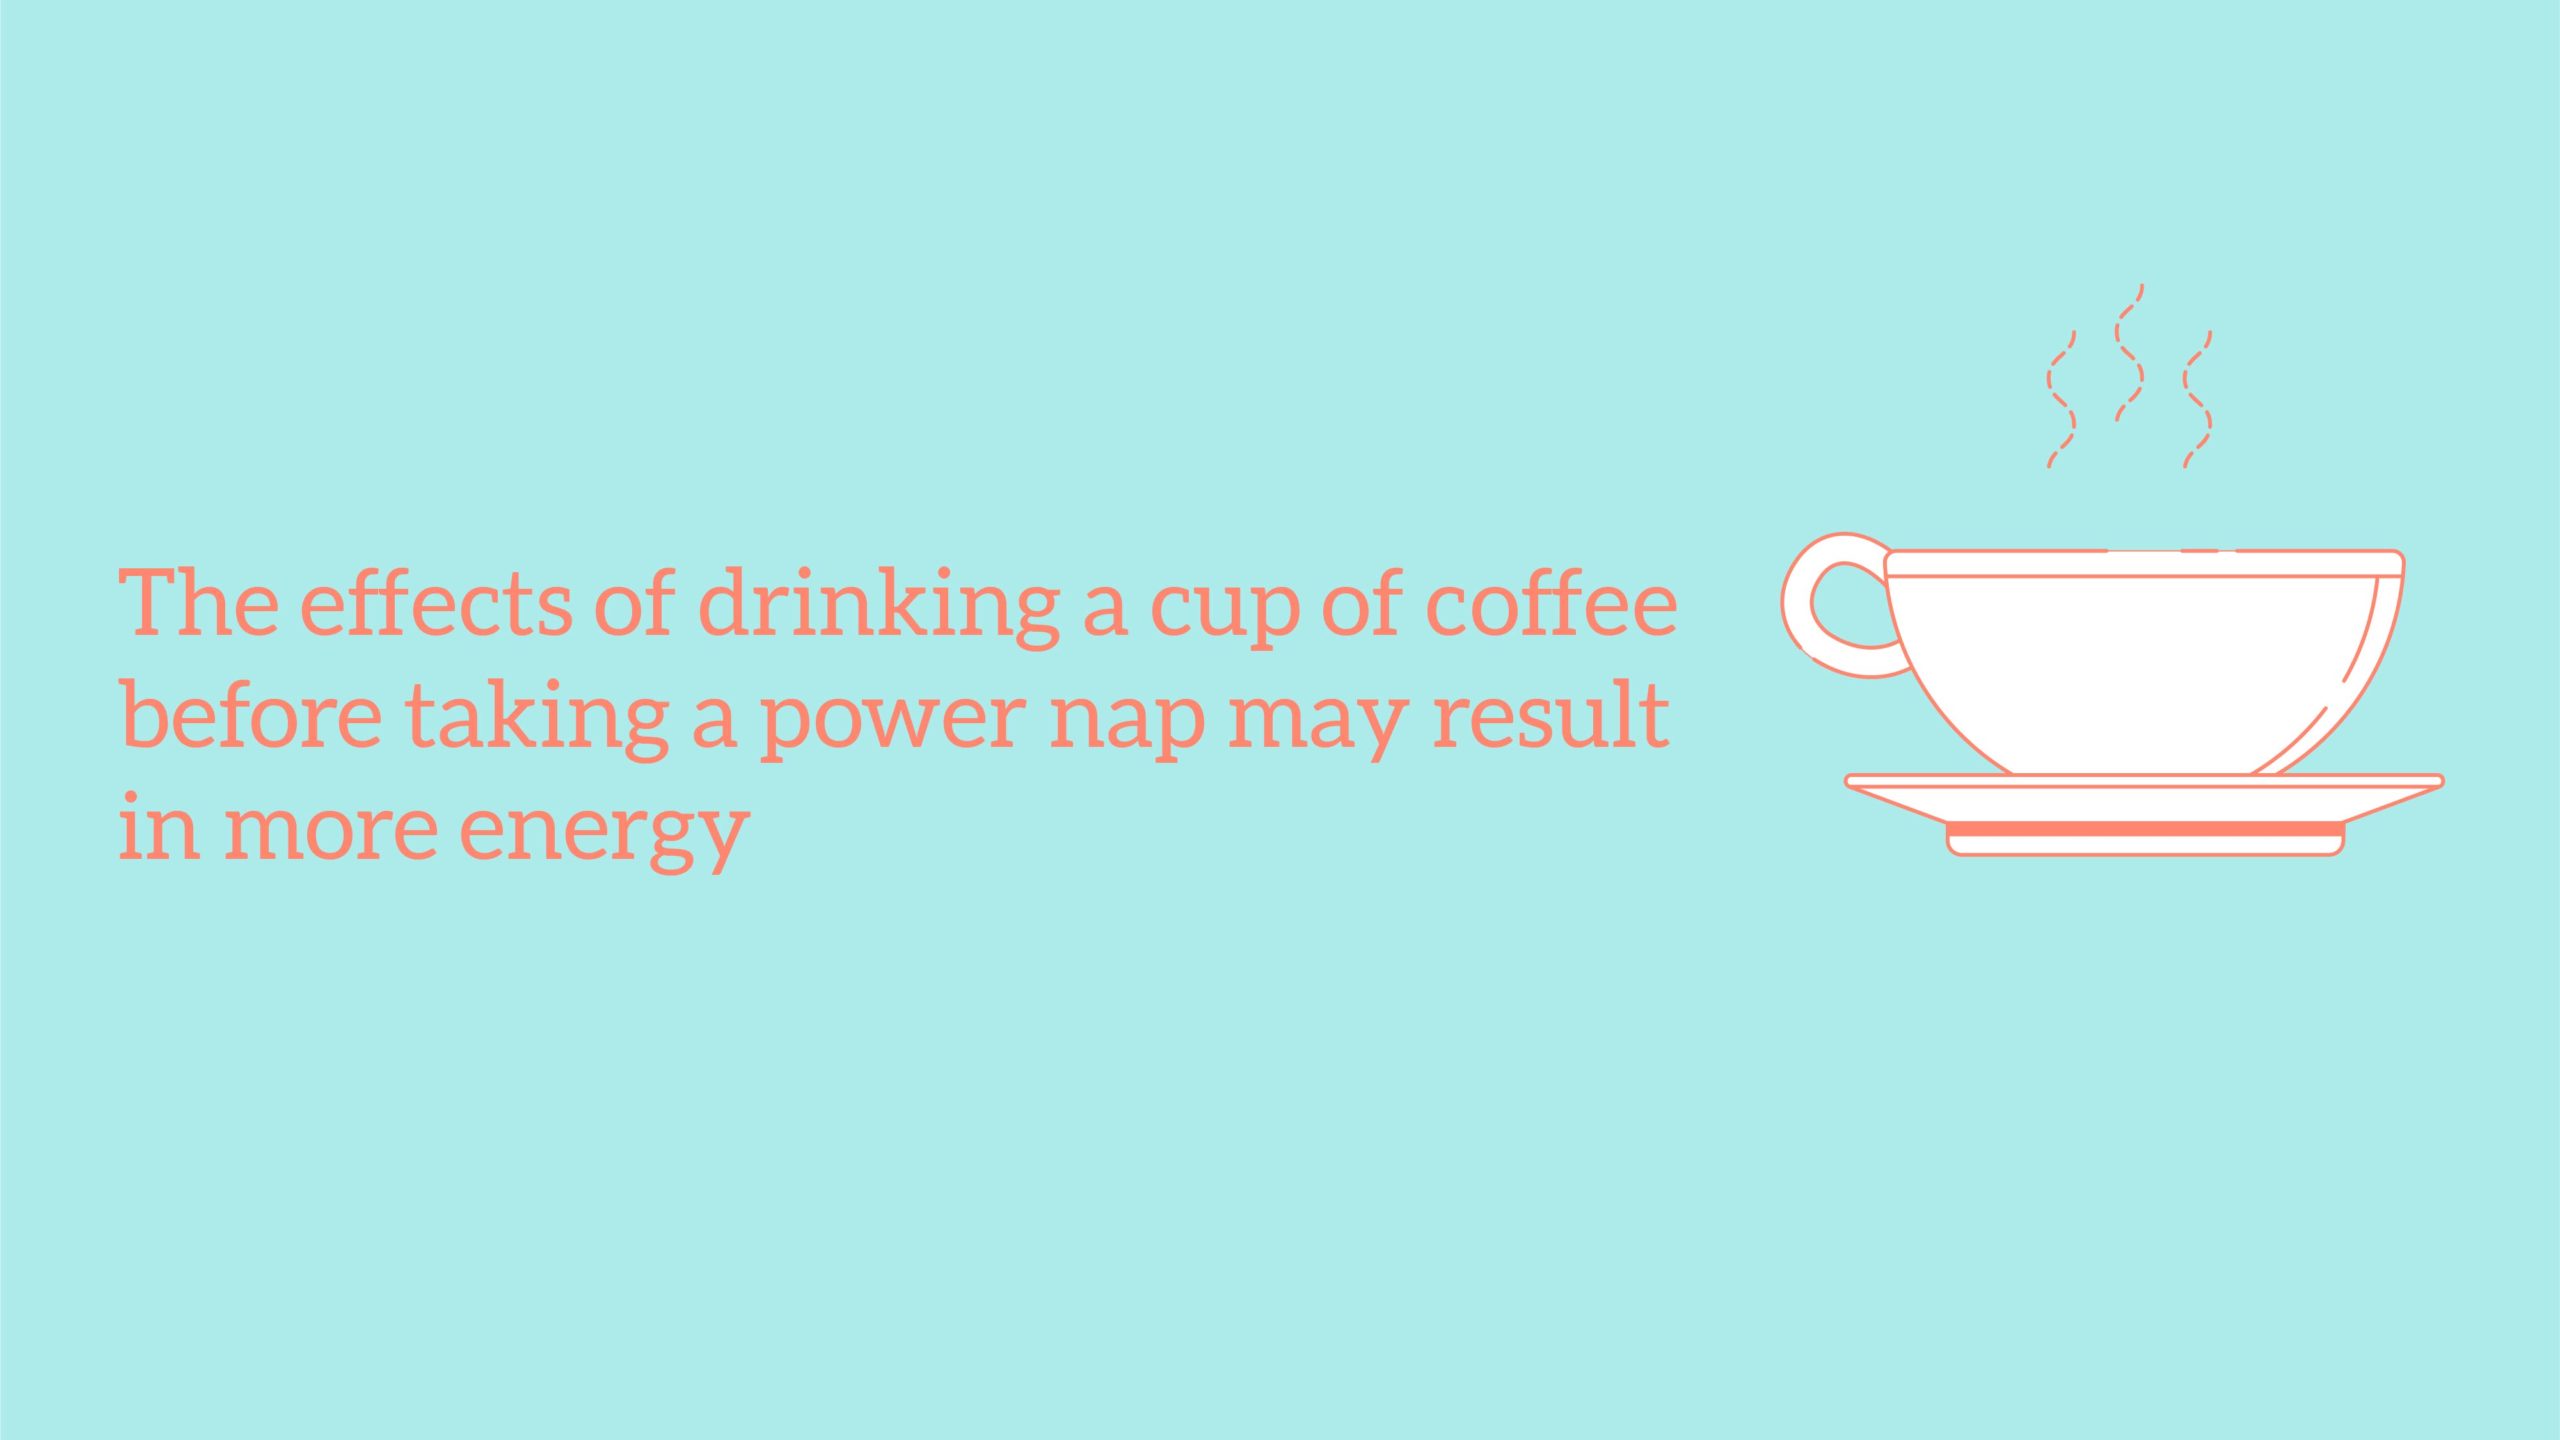 How to Power Nap